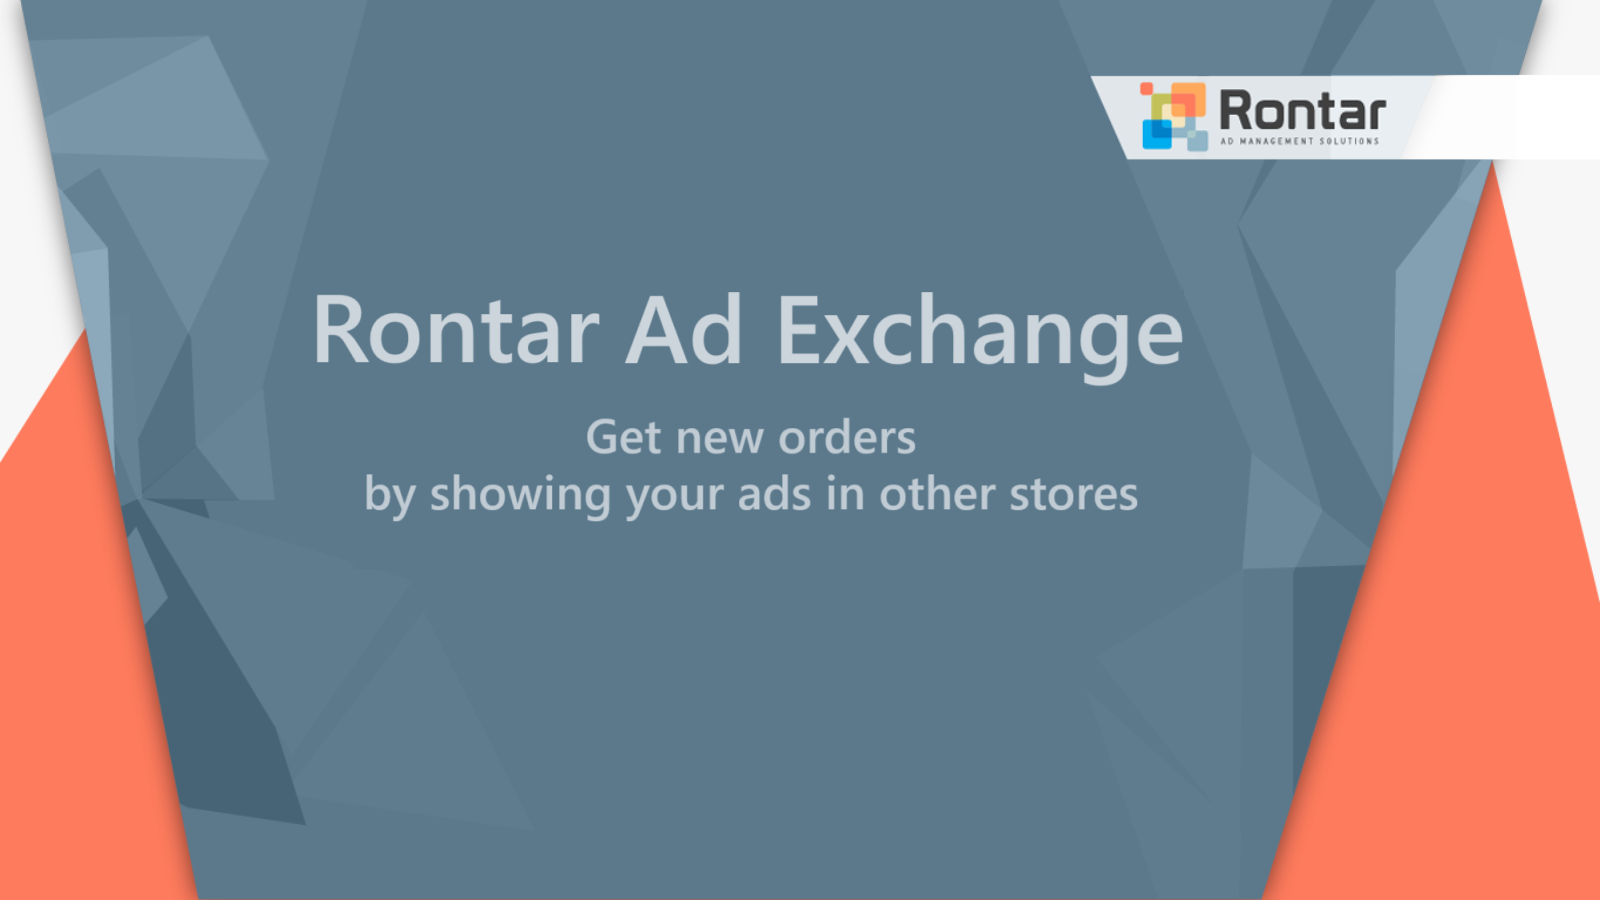 Get new orders by showing your ads in other stores